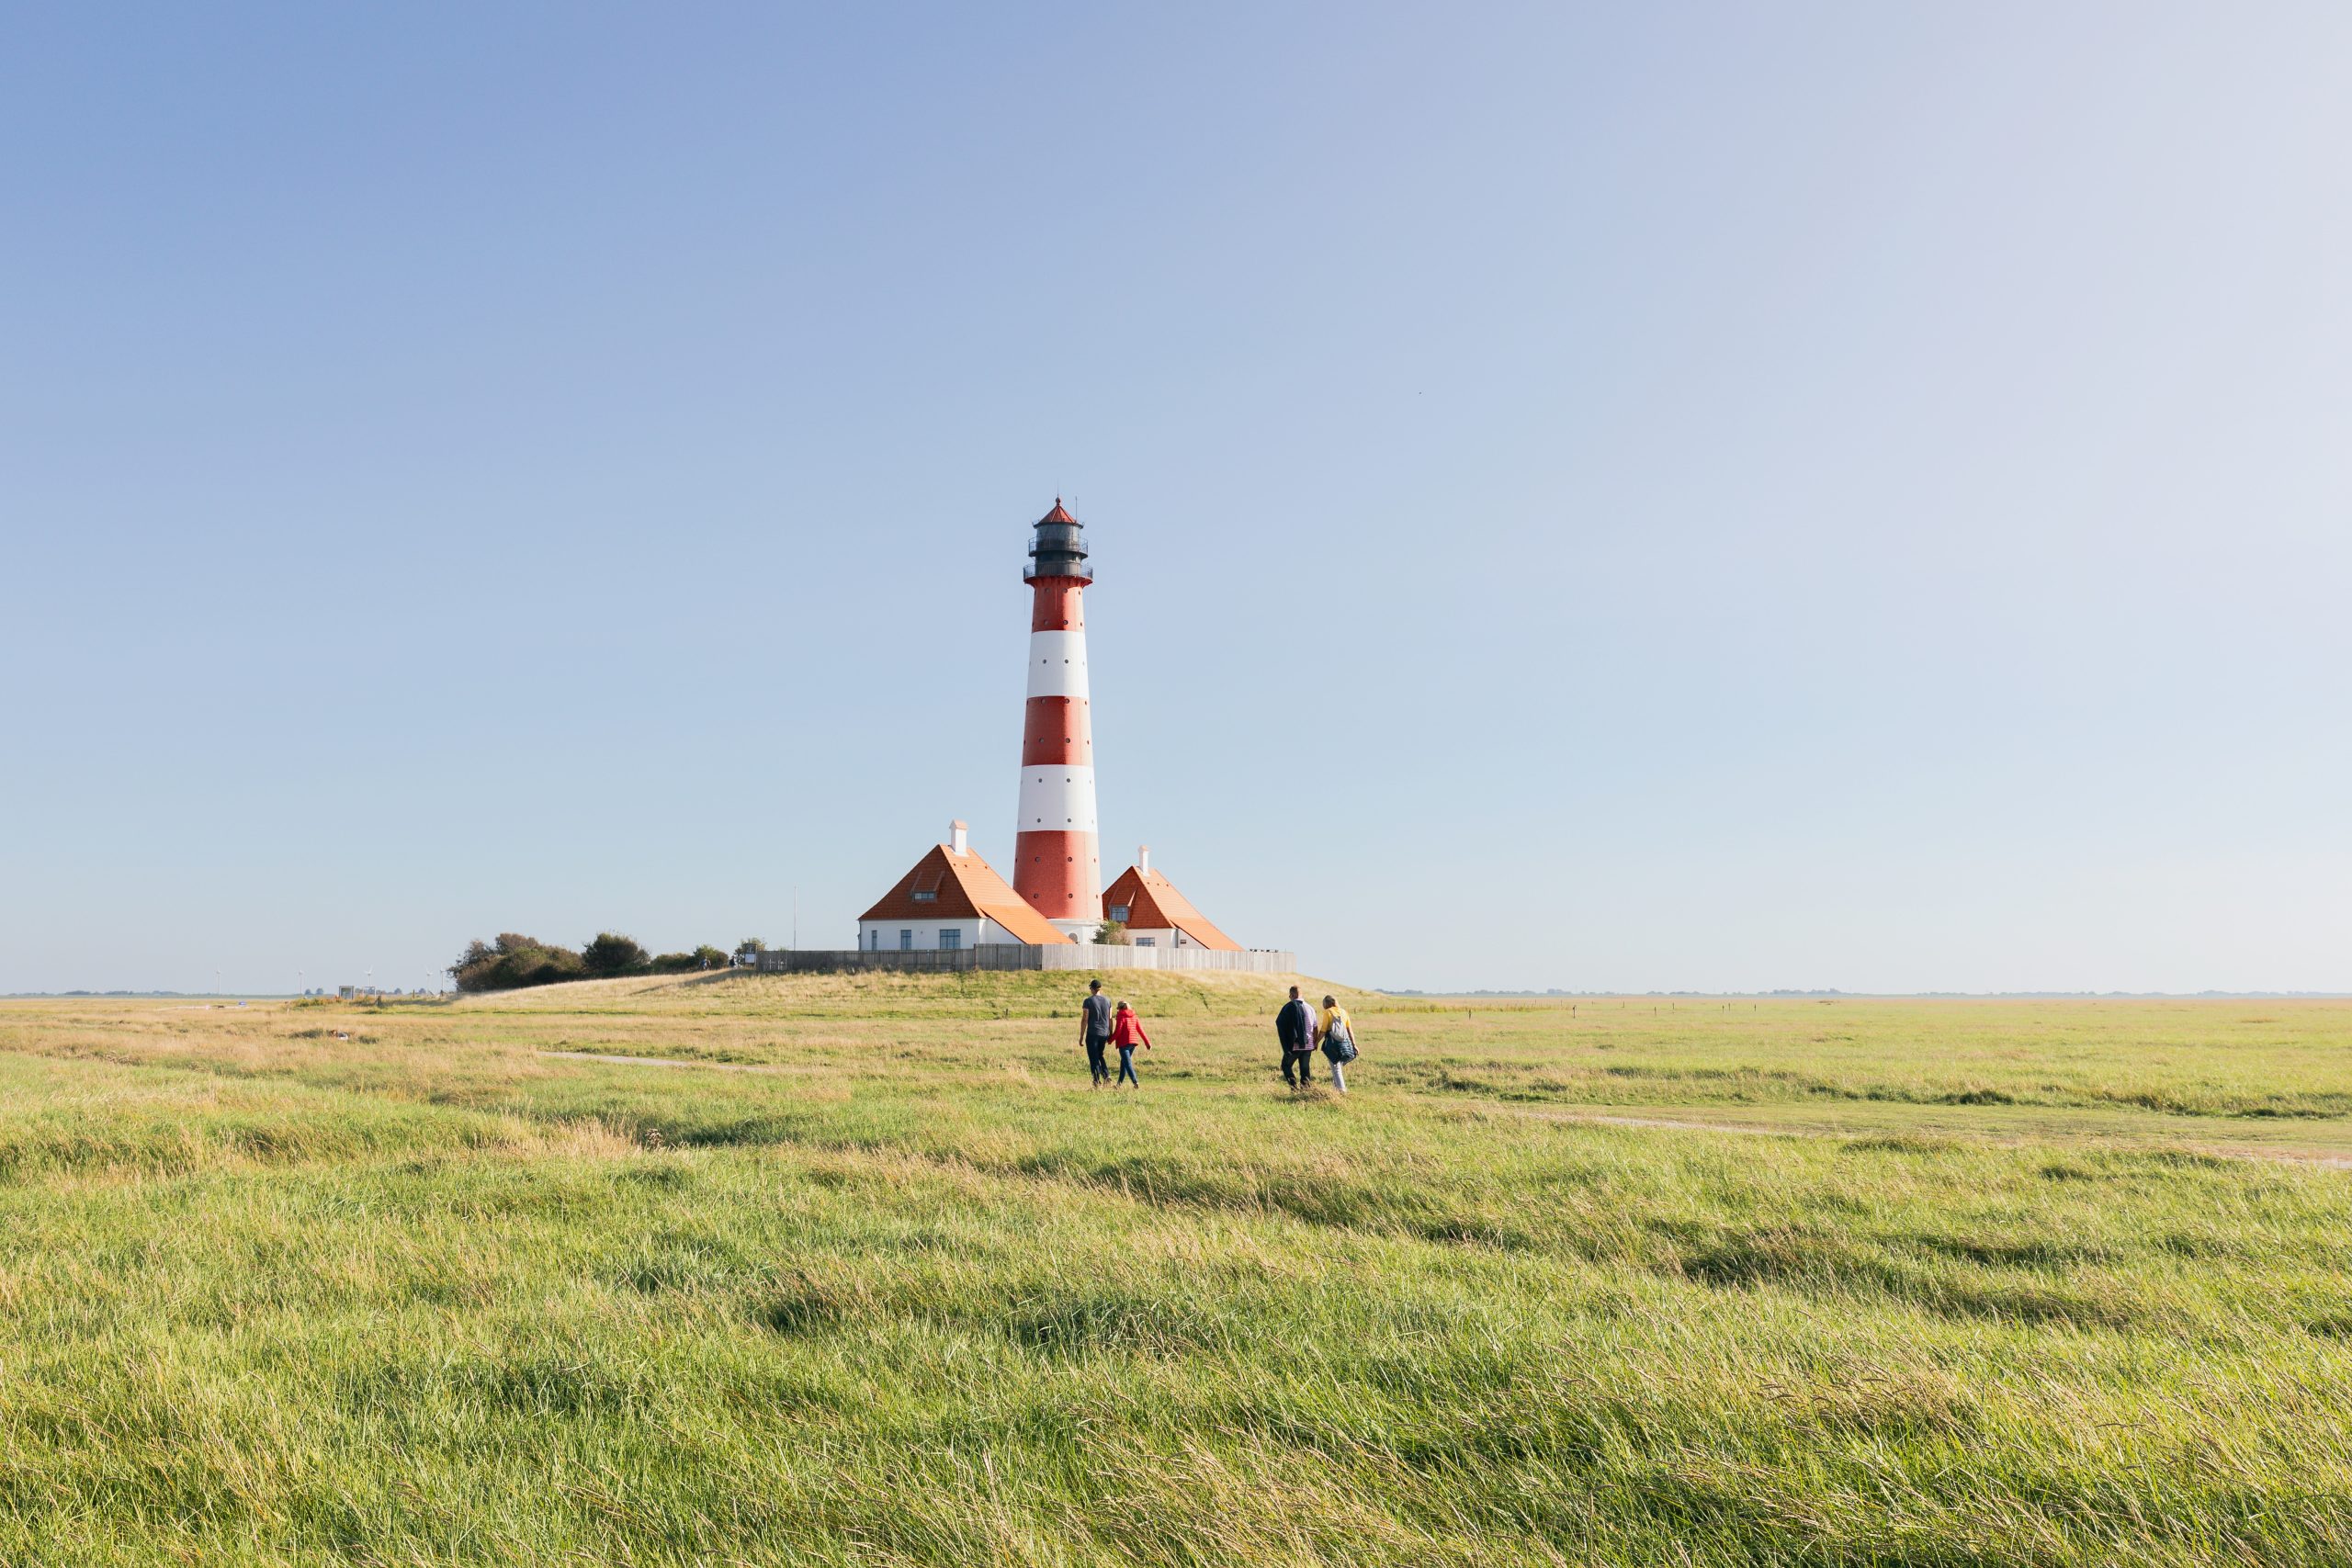 Family walking through a field. Shelter with an attached lighthouse in the distance.